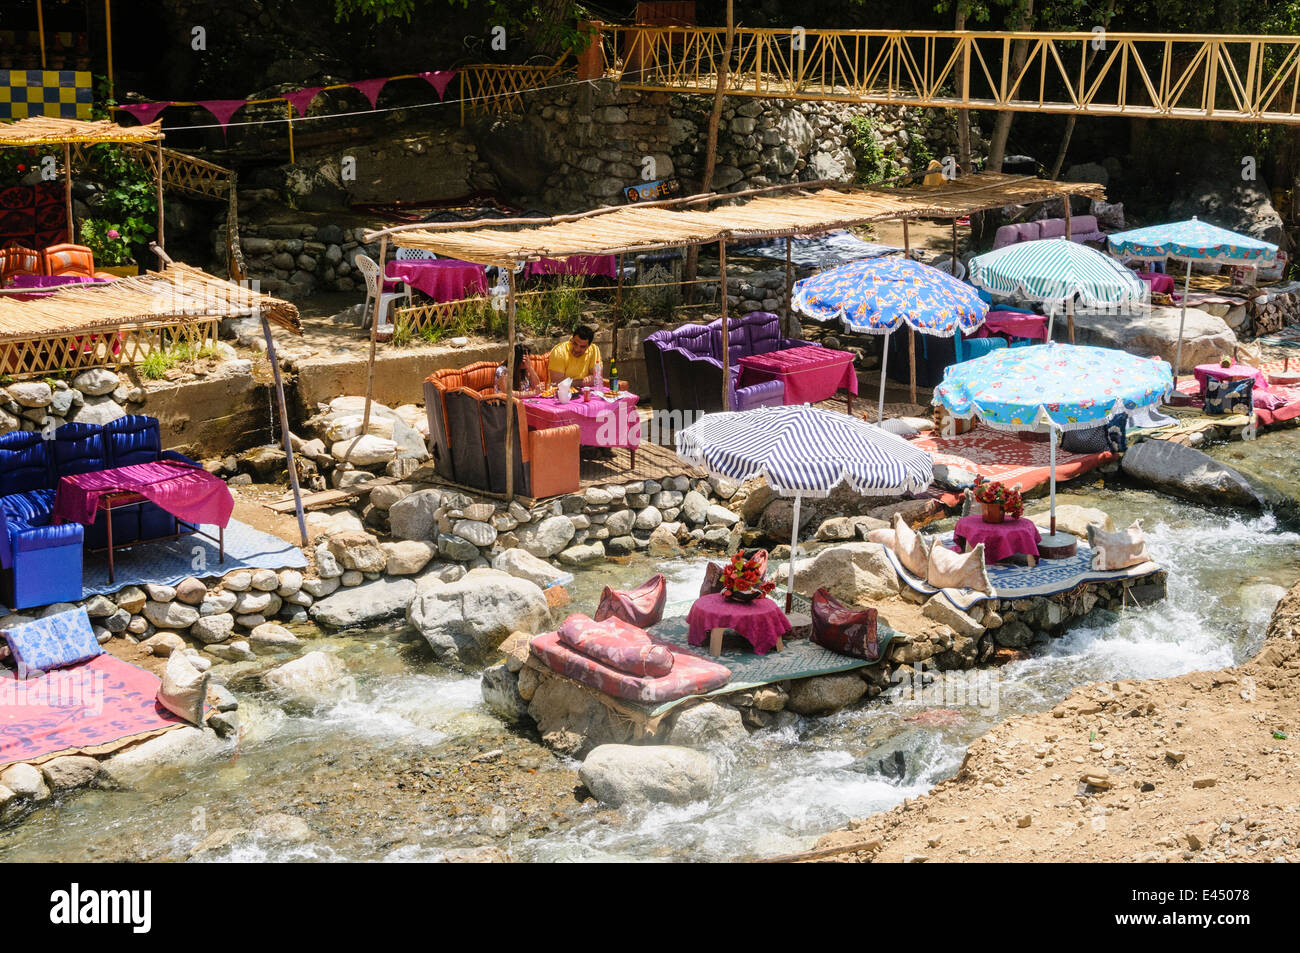 Plastic patio tables, chairs with parasols at restaurants on the banks of the Ourika River, Ourika Valley, Atlas Mountains, Morocco Stock Photo